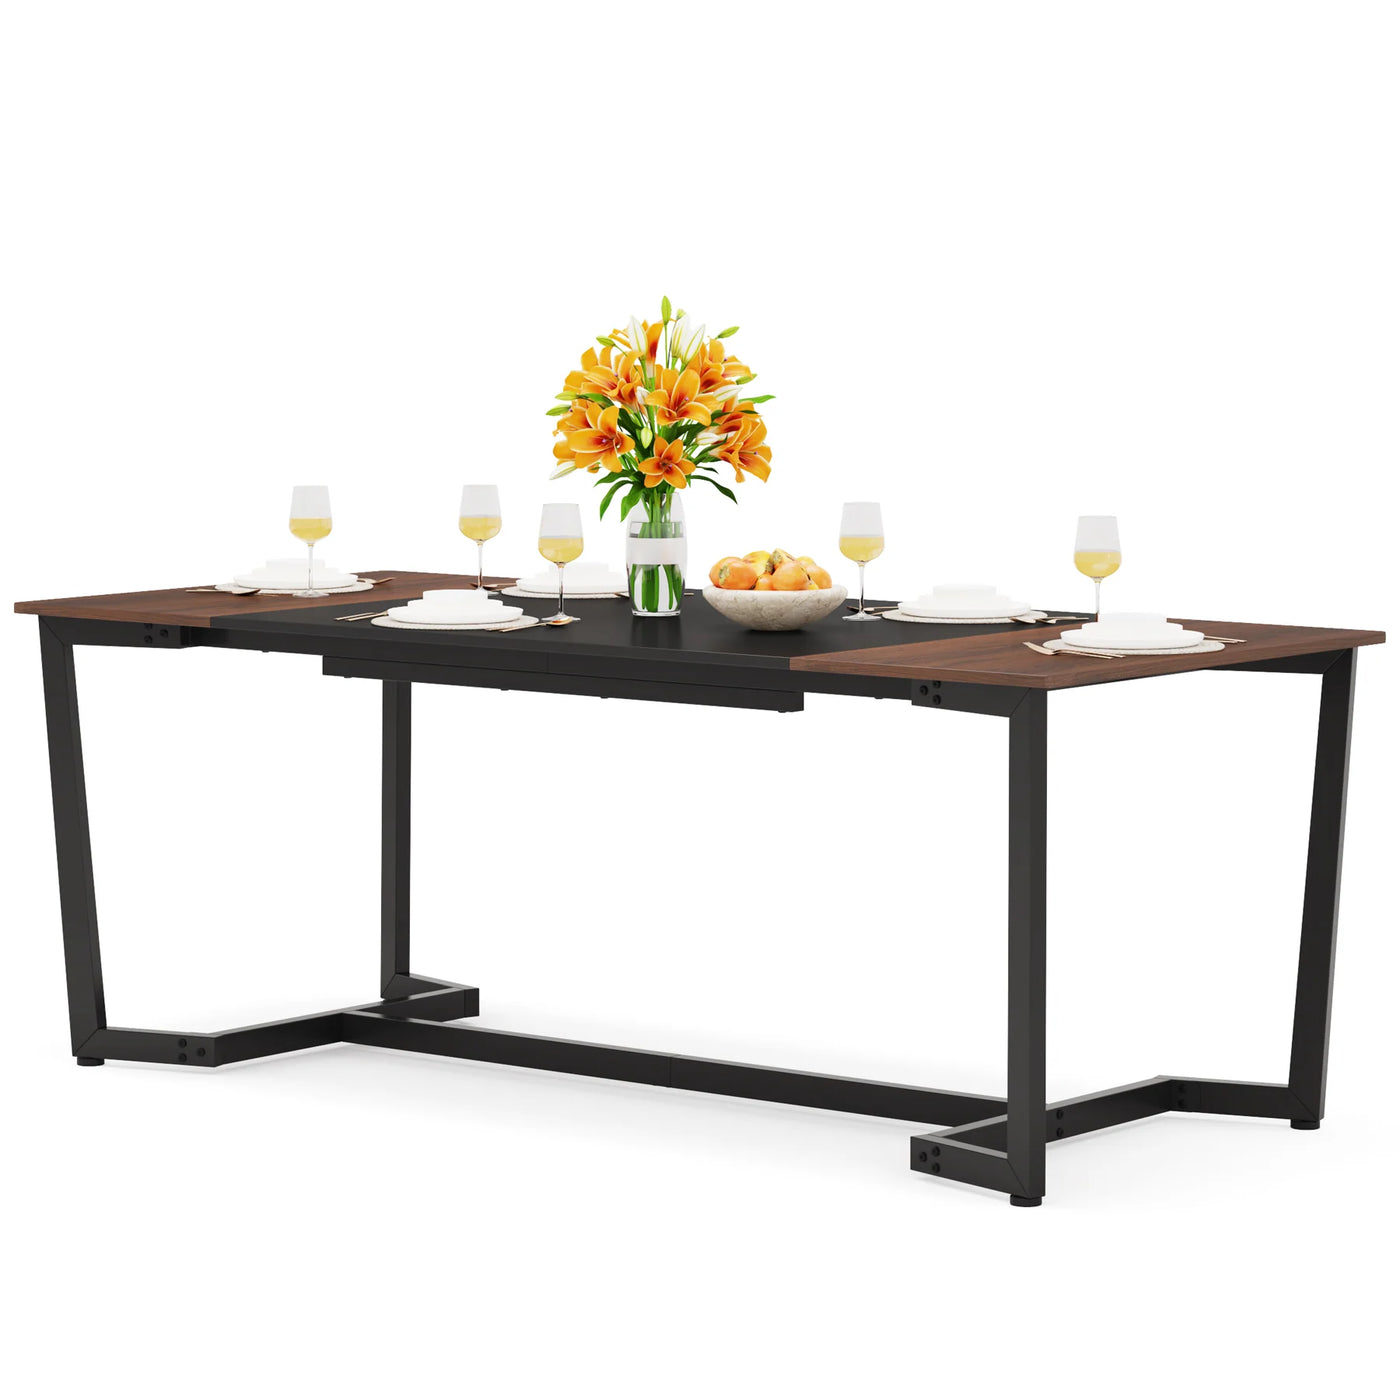 Clinton Wood Dining Table | Rectangular Kitchen Table Dining Room Table for 6 People